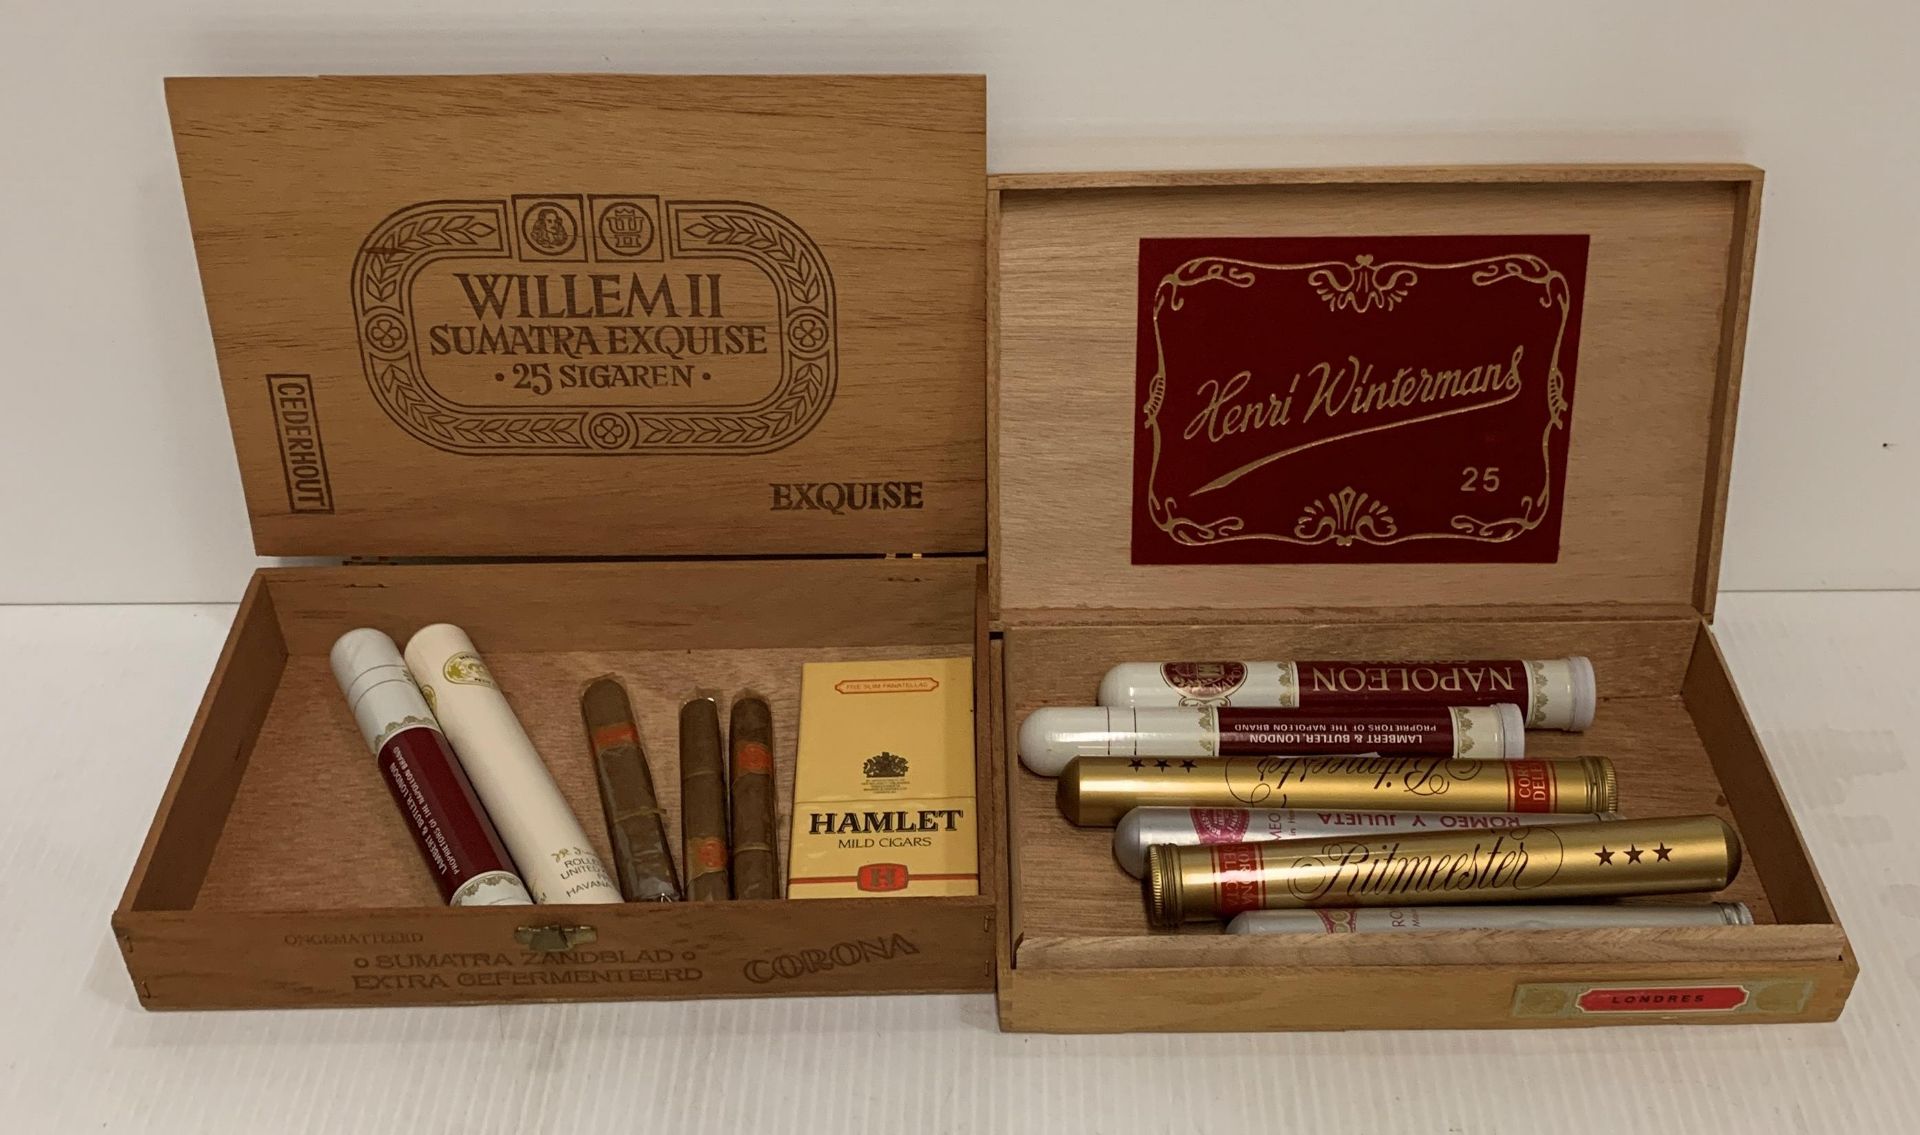 Two cigar boxes containing eight individual cigars in cylinders (3 Napoleon Coronas,